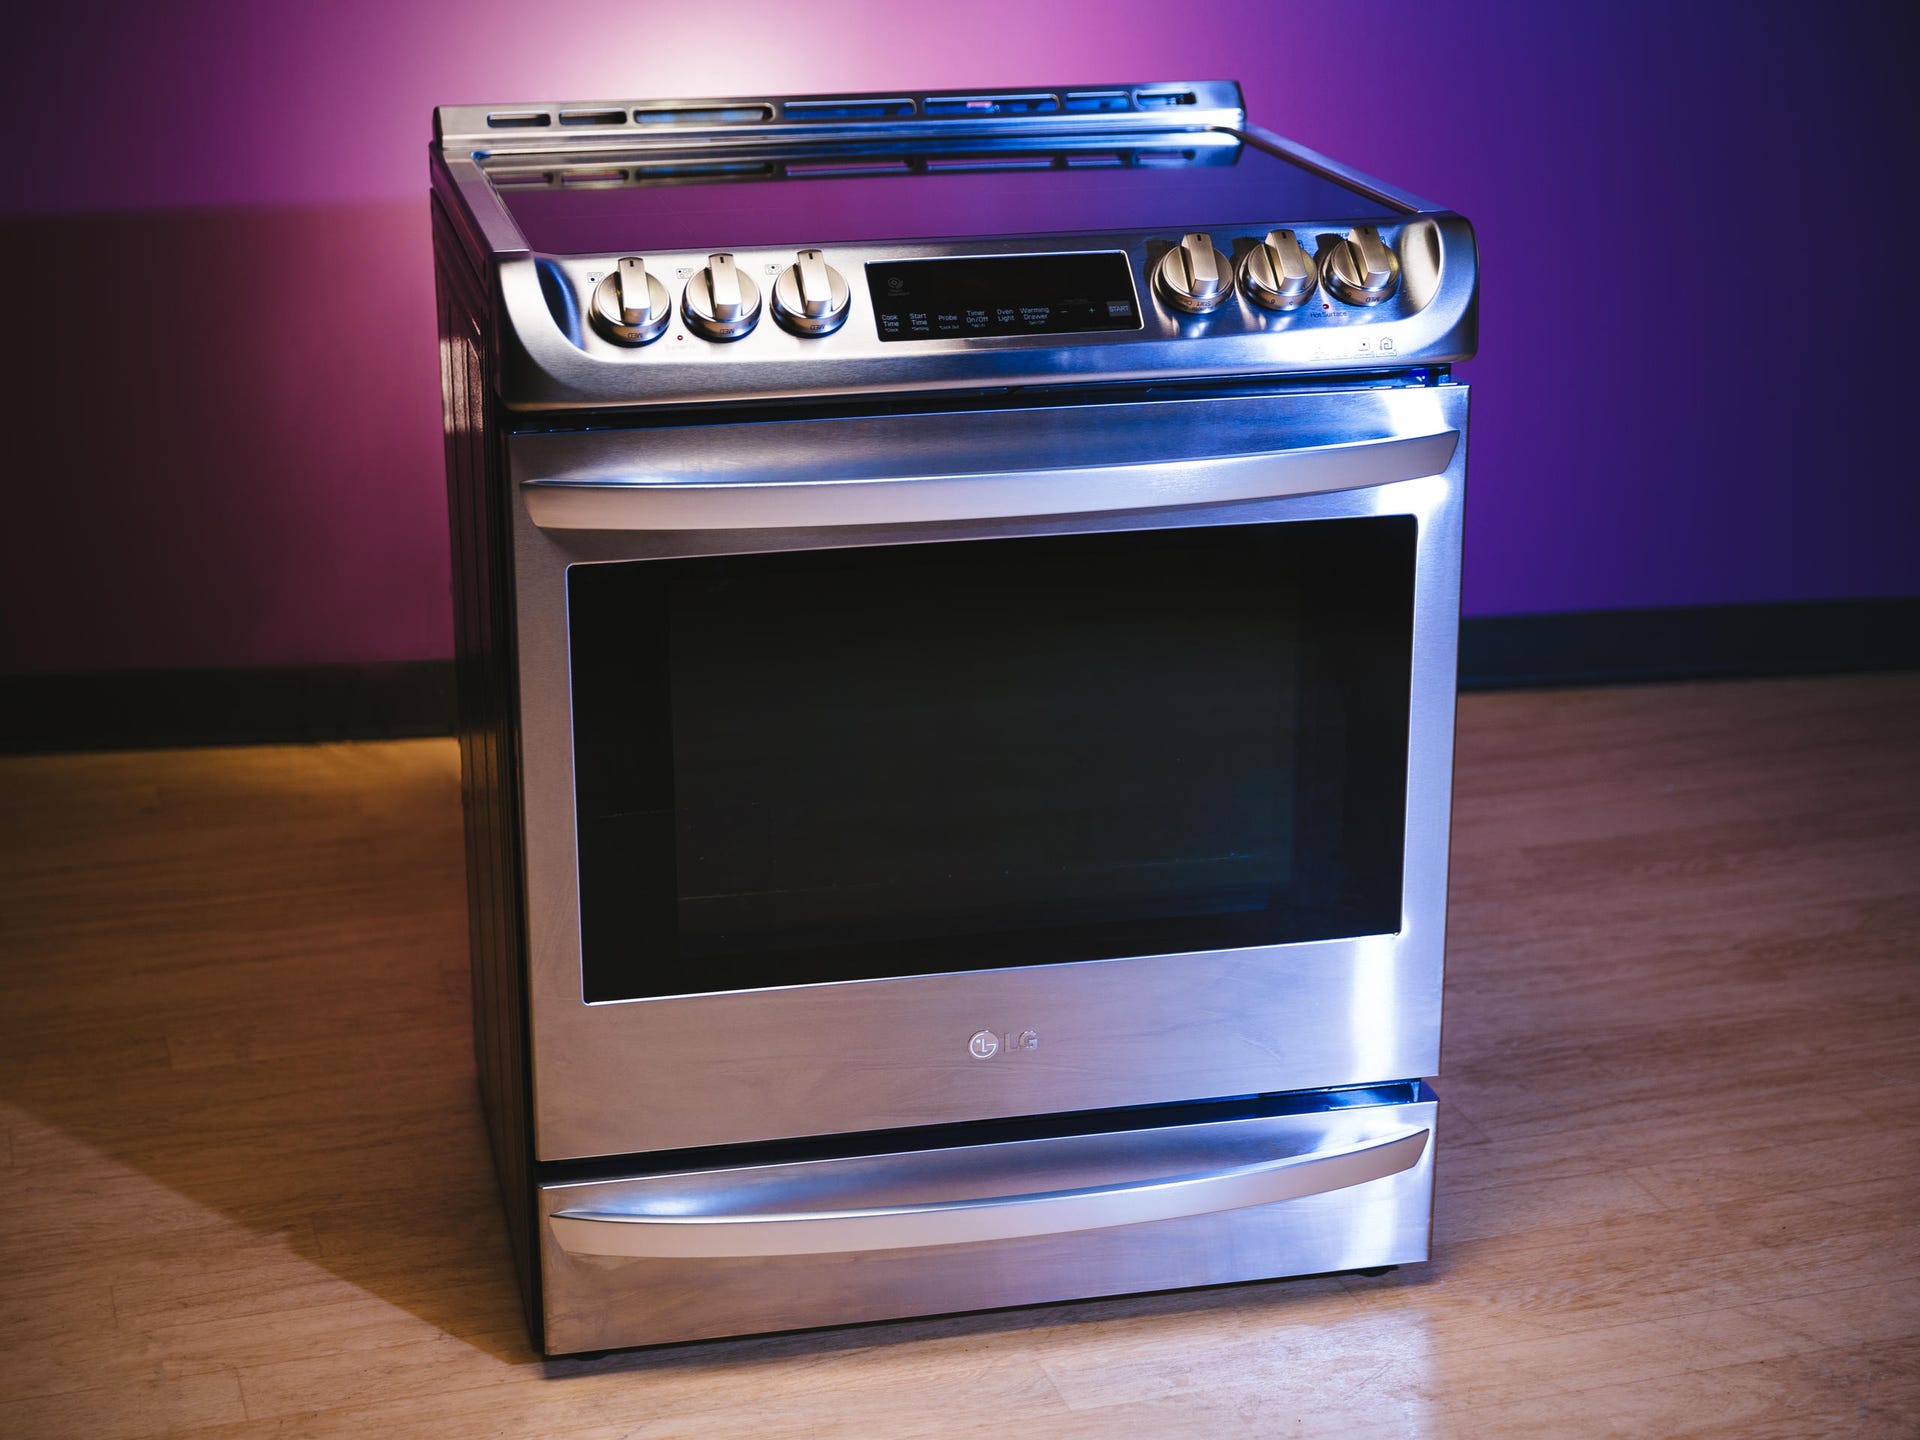 lg-lse4617st-oven-product-photos-1